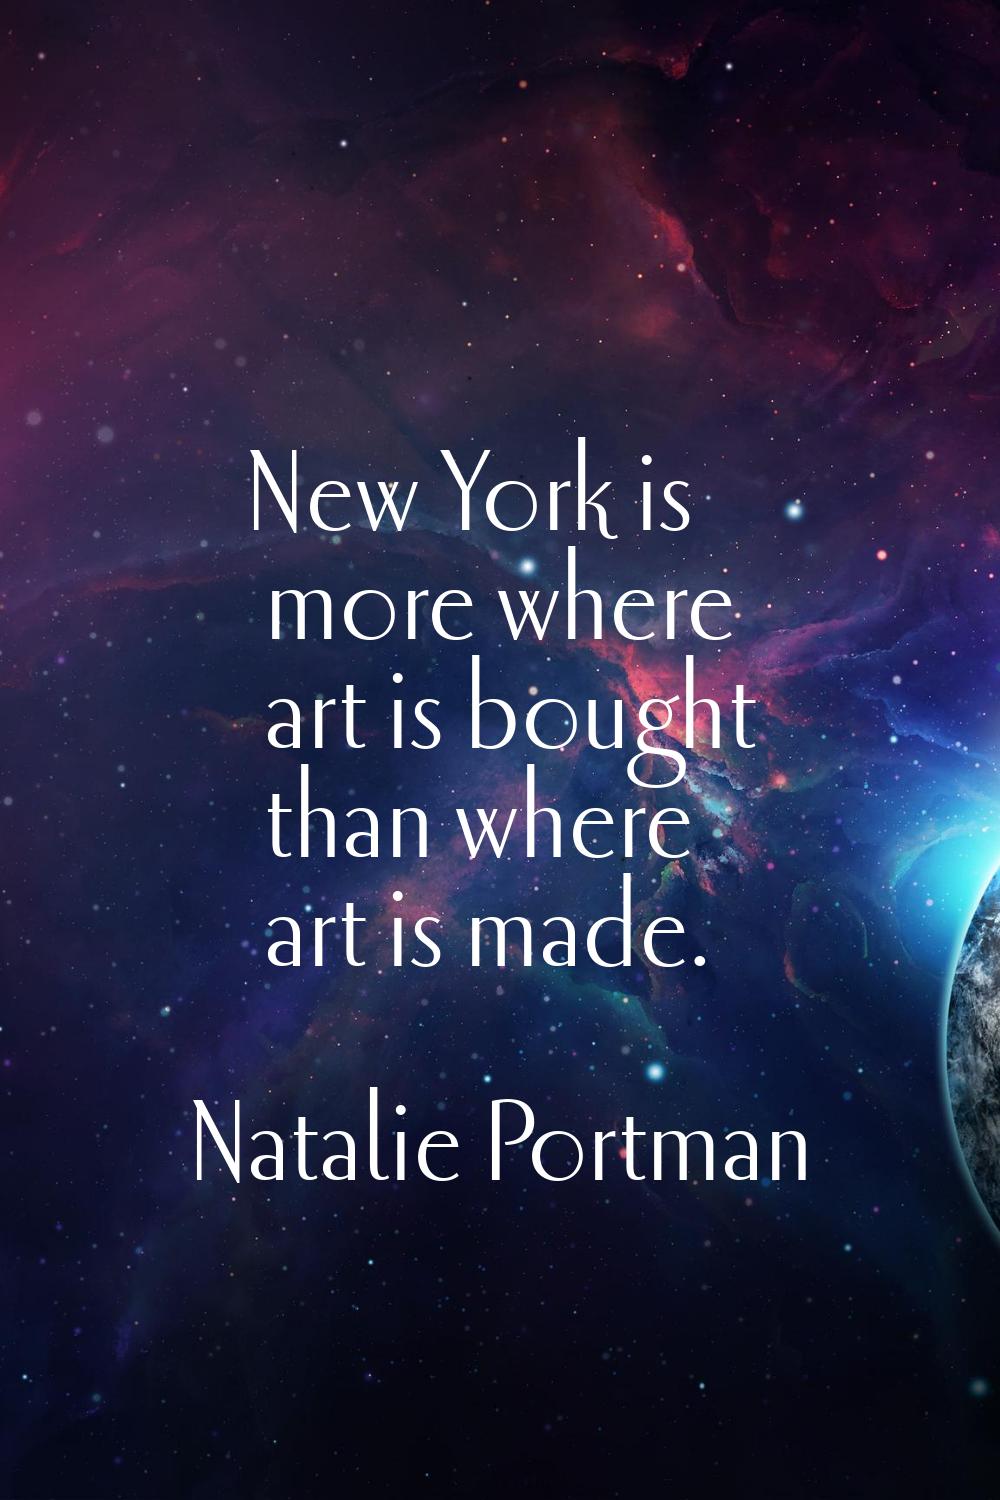 New York is more where art is bought than where art is made.